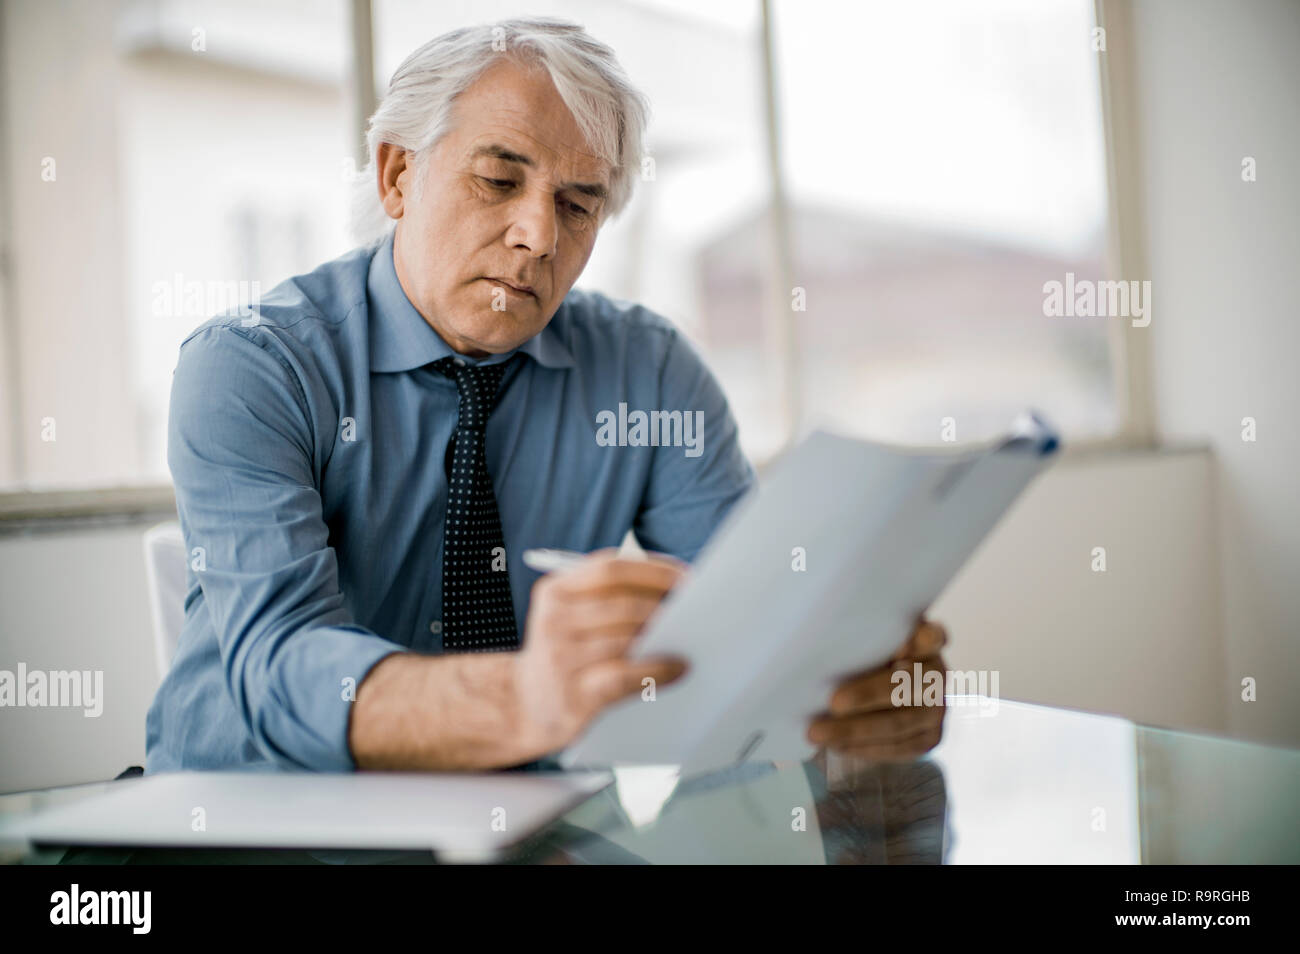 Focused businessman working in a corporate board room. Stock Photo